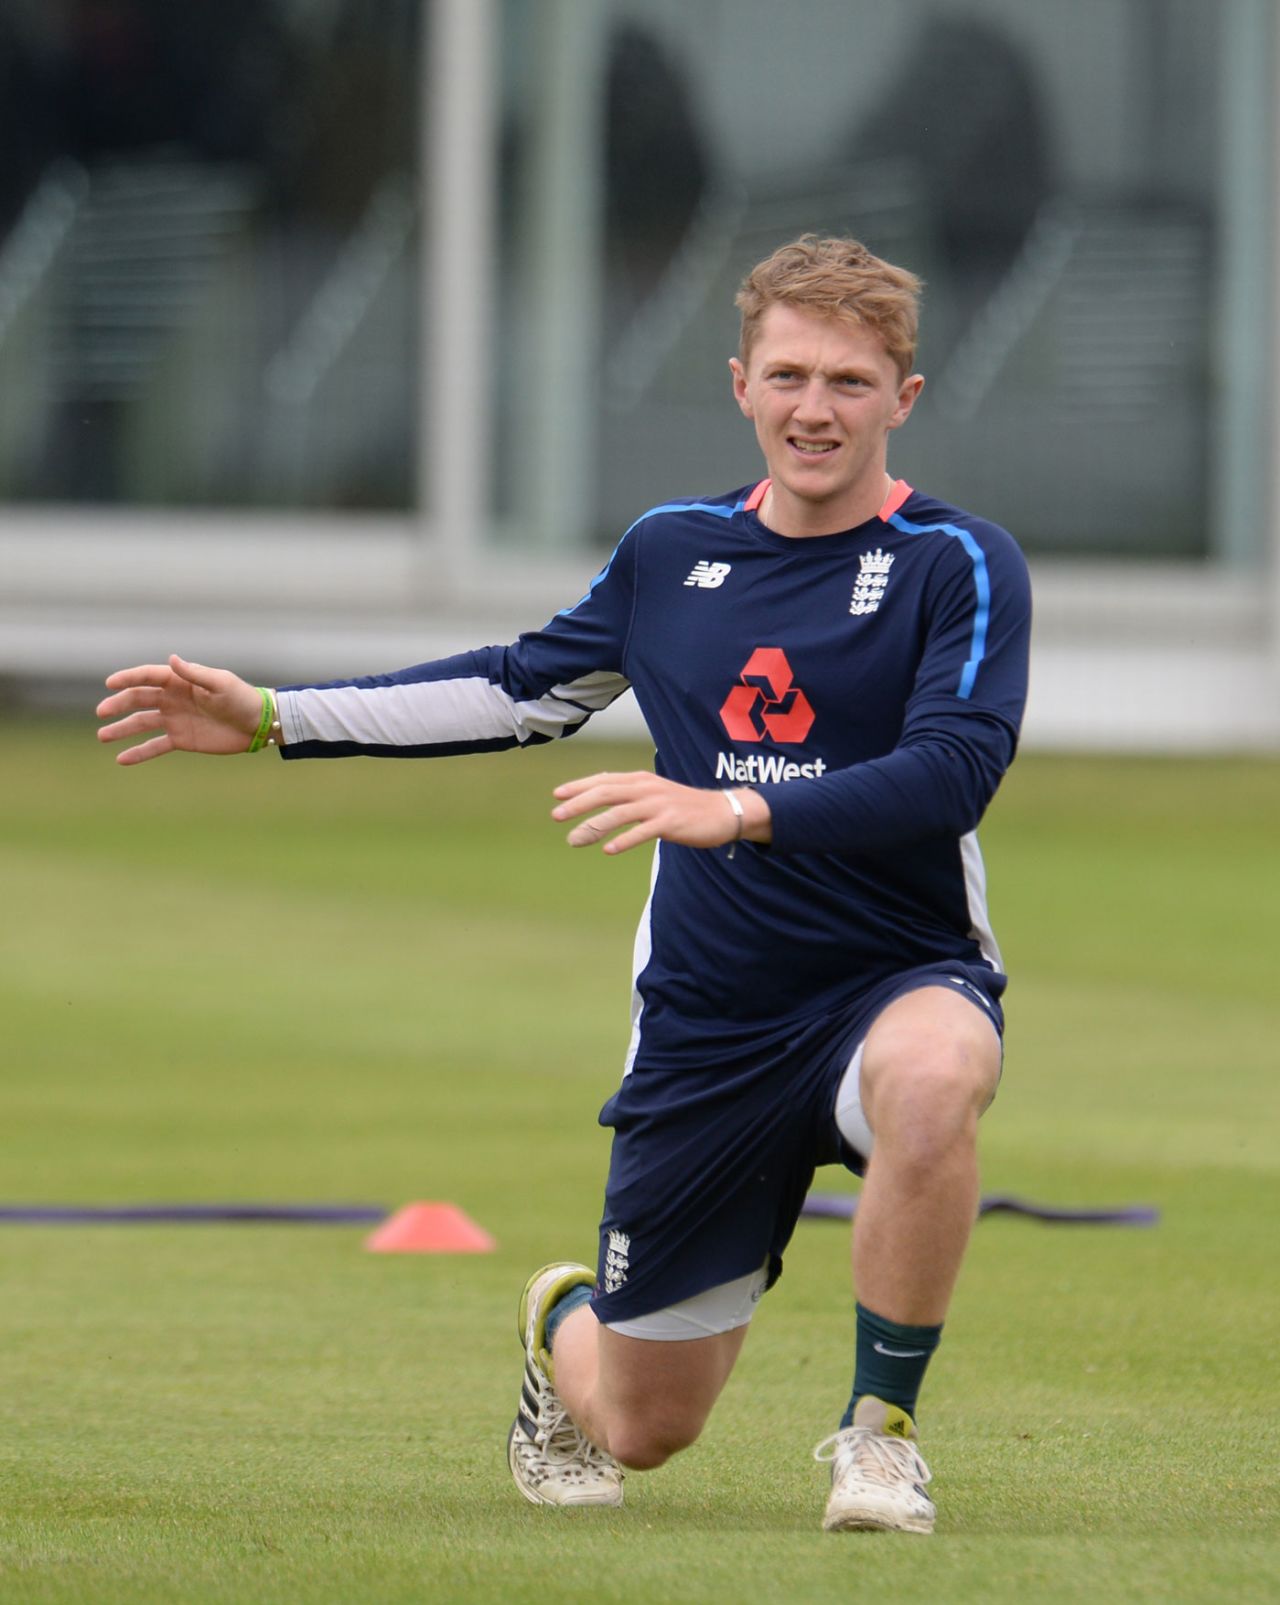 Dom Bess was involved in his first England training session, Lord's, May 21, 2018